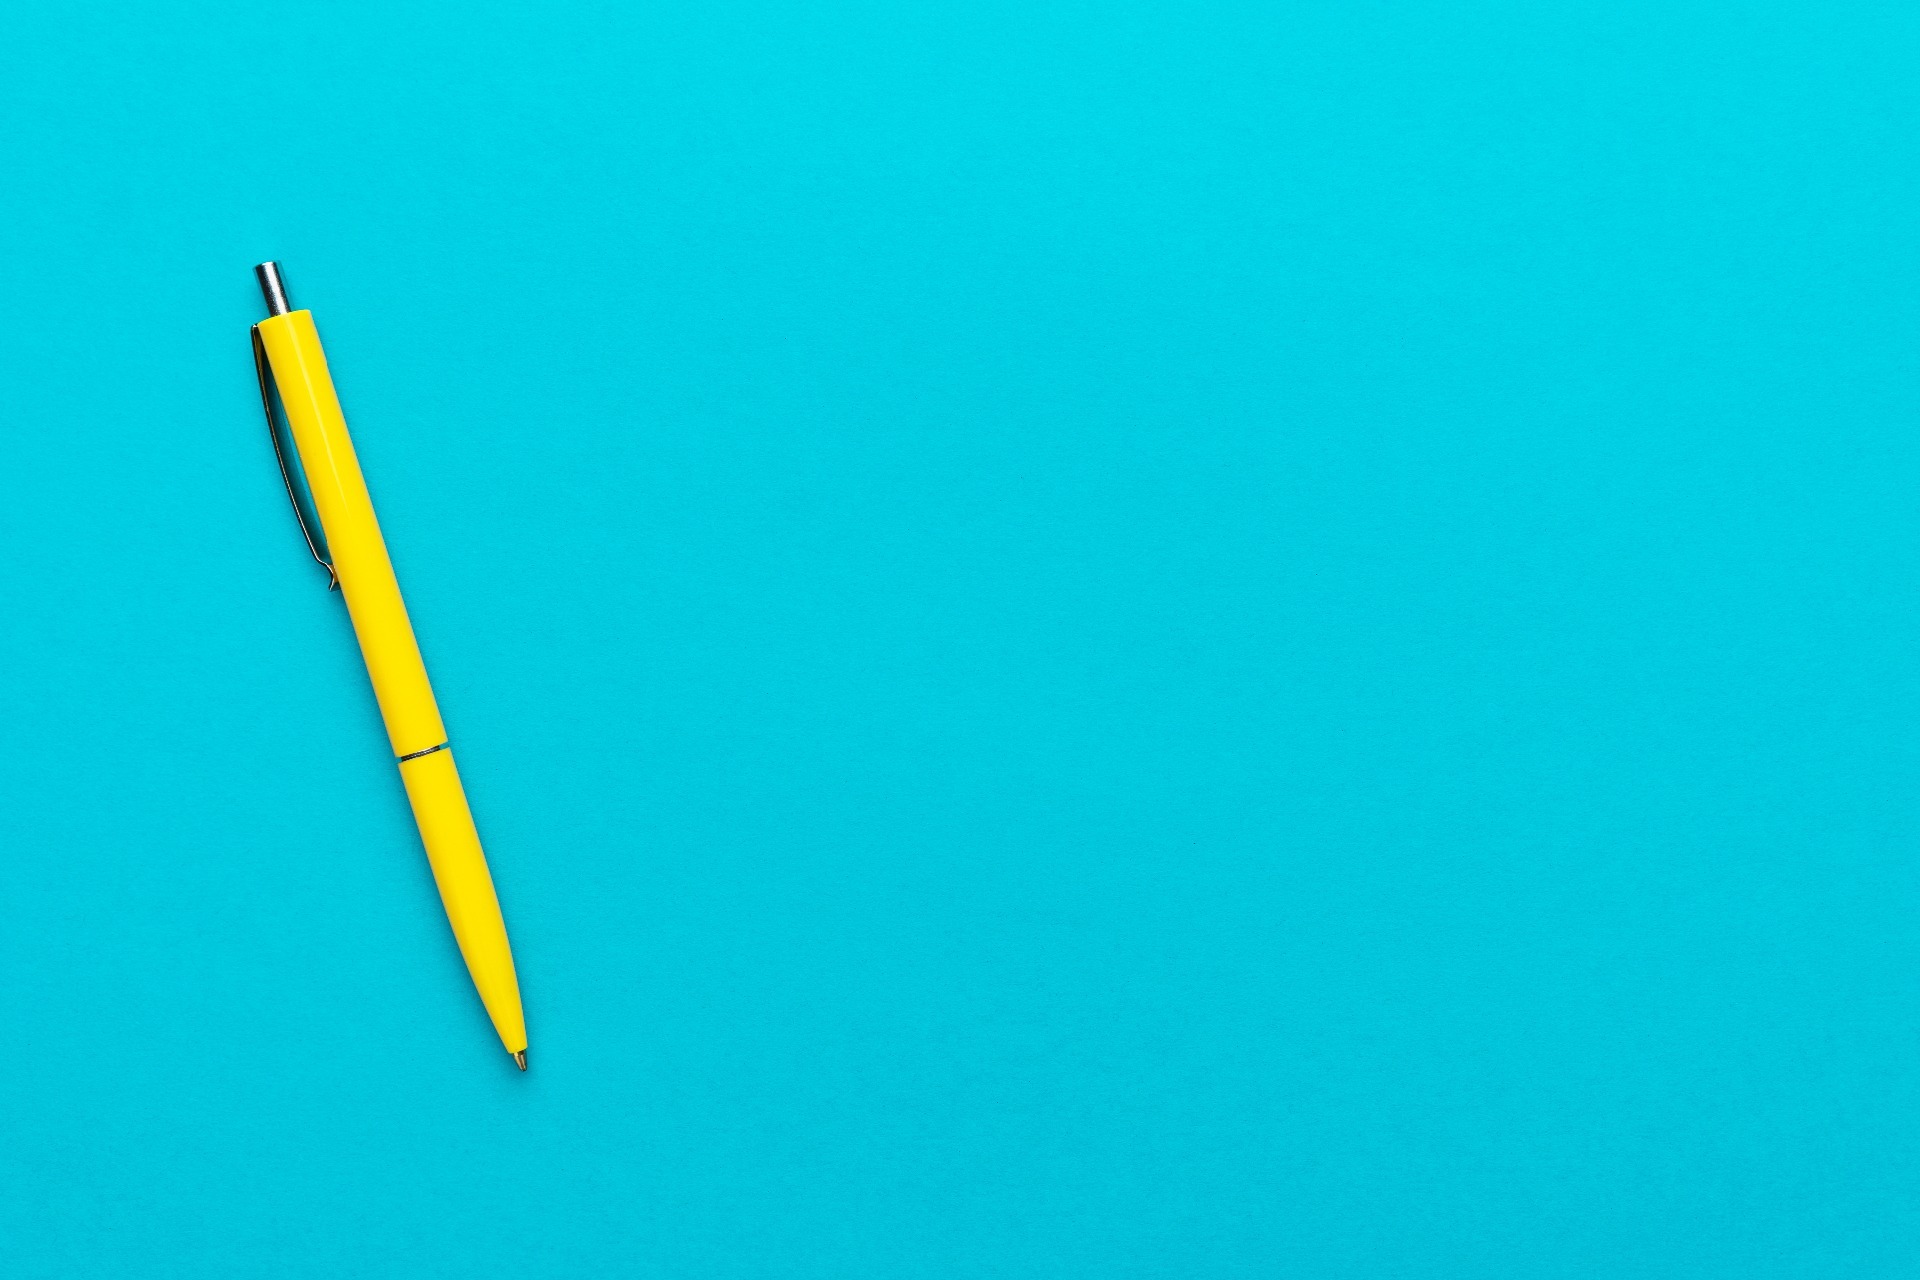 A yellow pen resting on a blue background.